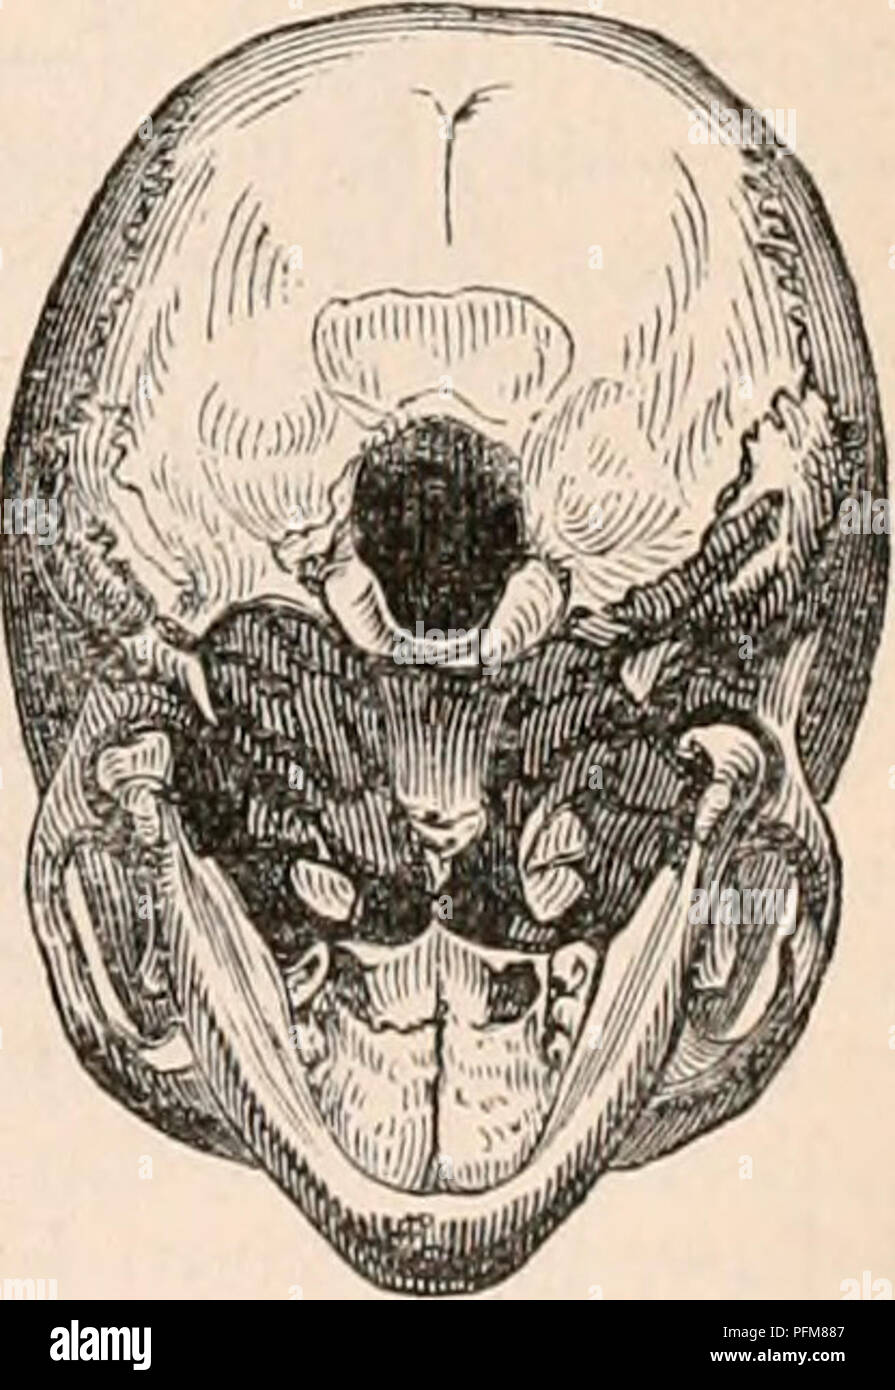 . The cyclopædia of anatomy and physiology. Anatomy; Physiology; Zoology. Elliptical Cranium of European. (From a specimen in the Museum of the Royal College of Surgeons.&quot;) the corresponding view injigs. 807. and 811.; for in the former it will be seen that the breadth continues to increase above the orbits, and that the cranial vault is rounded and capacious ; whilst in the other two, the breadth diminishes rapidly, especially in the frontal region, from the floor of the orbits upwards. The form of the zygomatic arches is such, that in the facial view they do not project laterally beyond Stock Photo